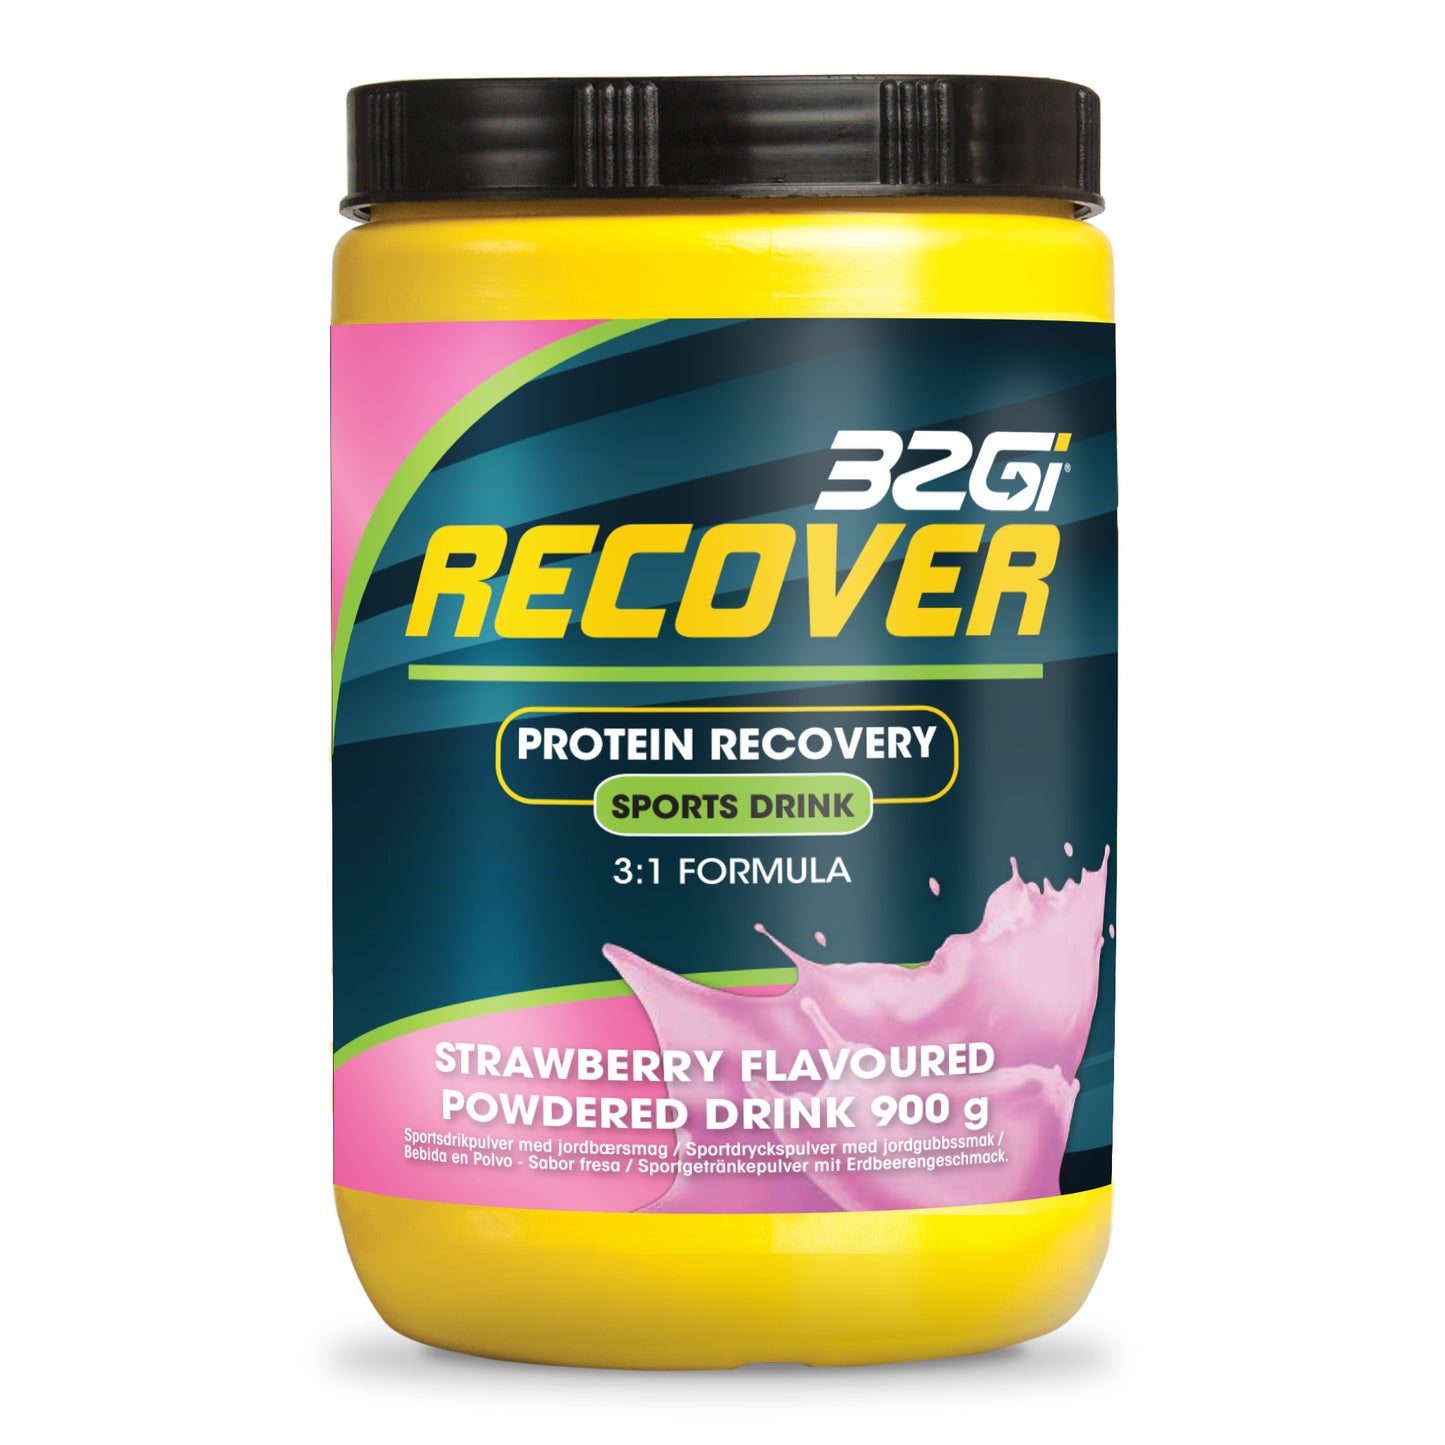 32Gi Protein Recovery Bottle